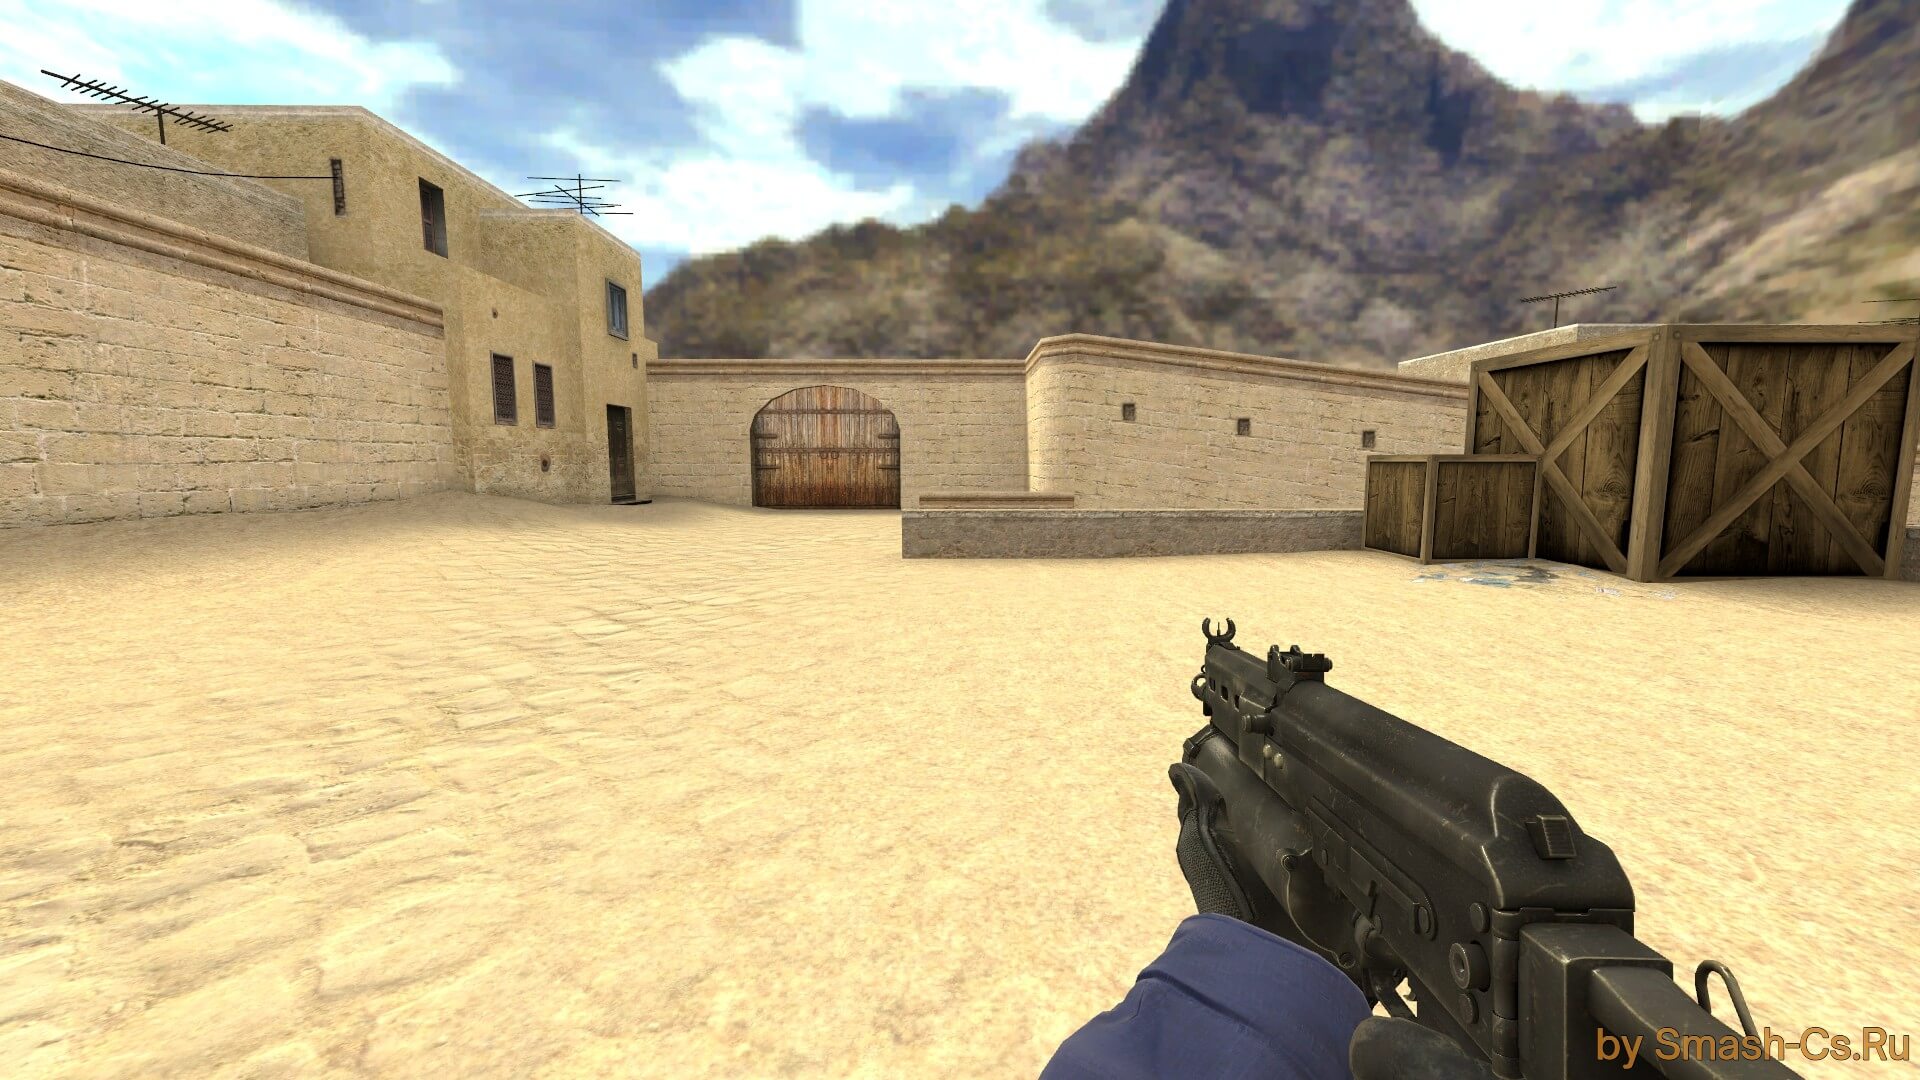 PP-Bizon Sand Dashed cs go skin download the new version for apple